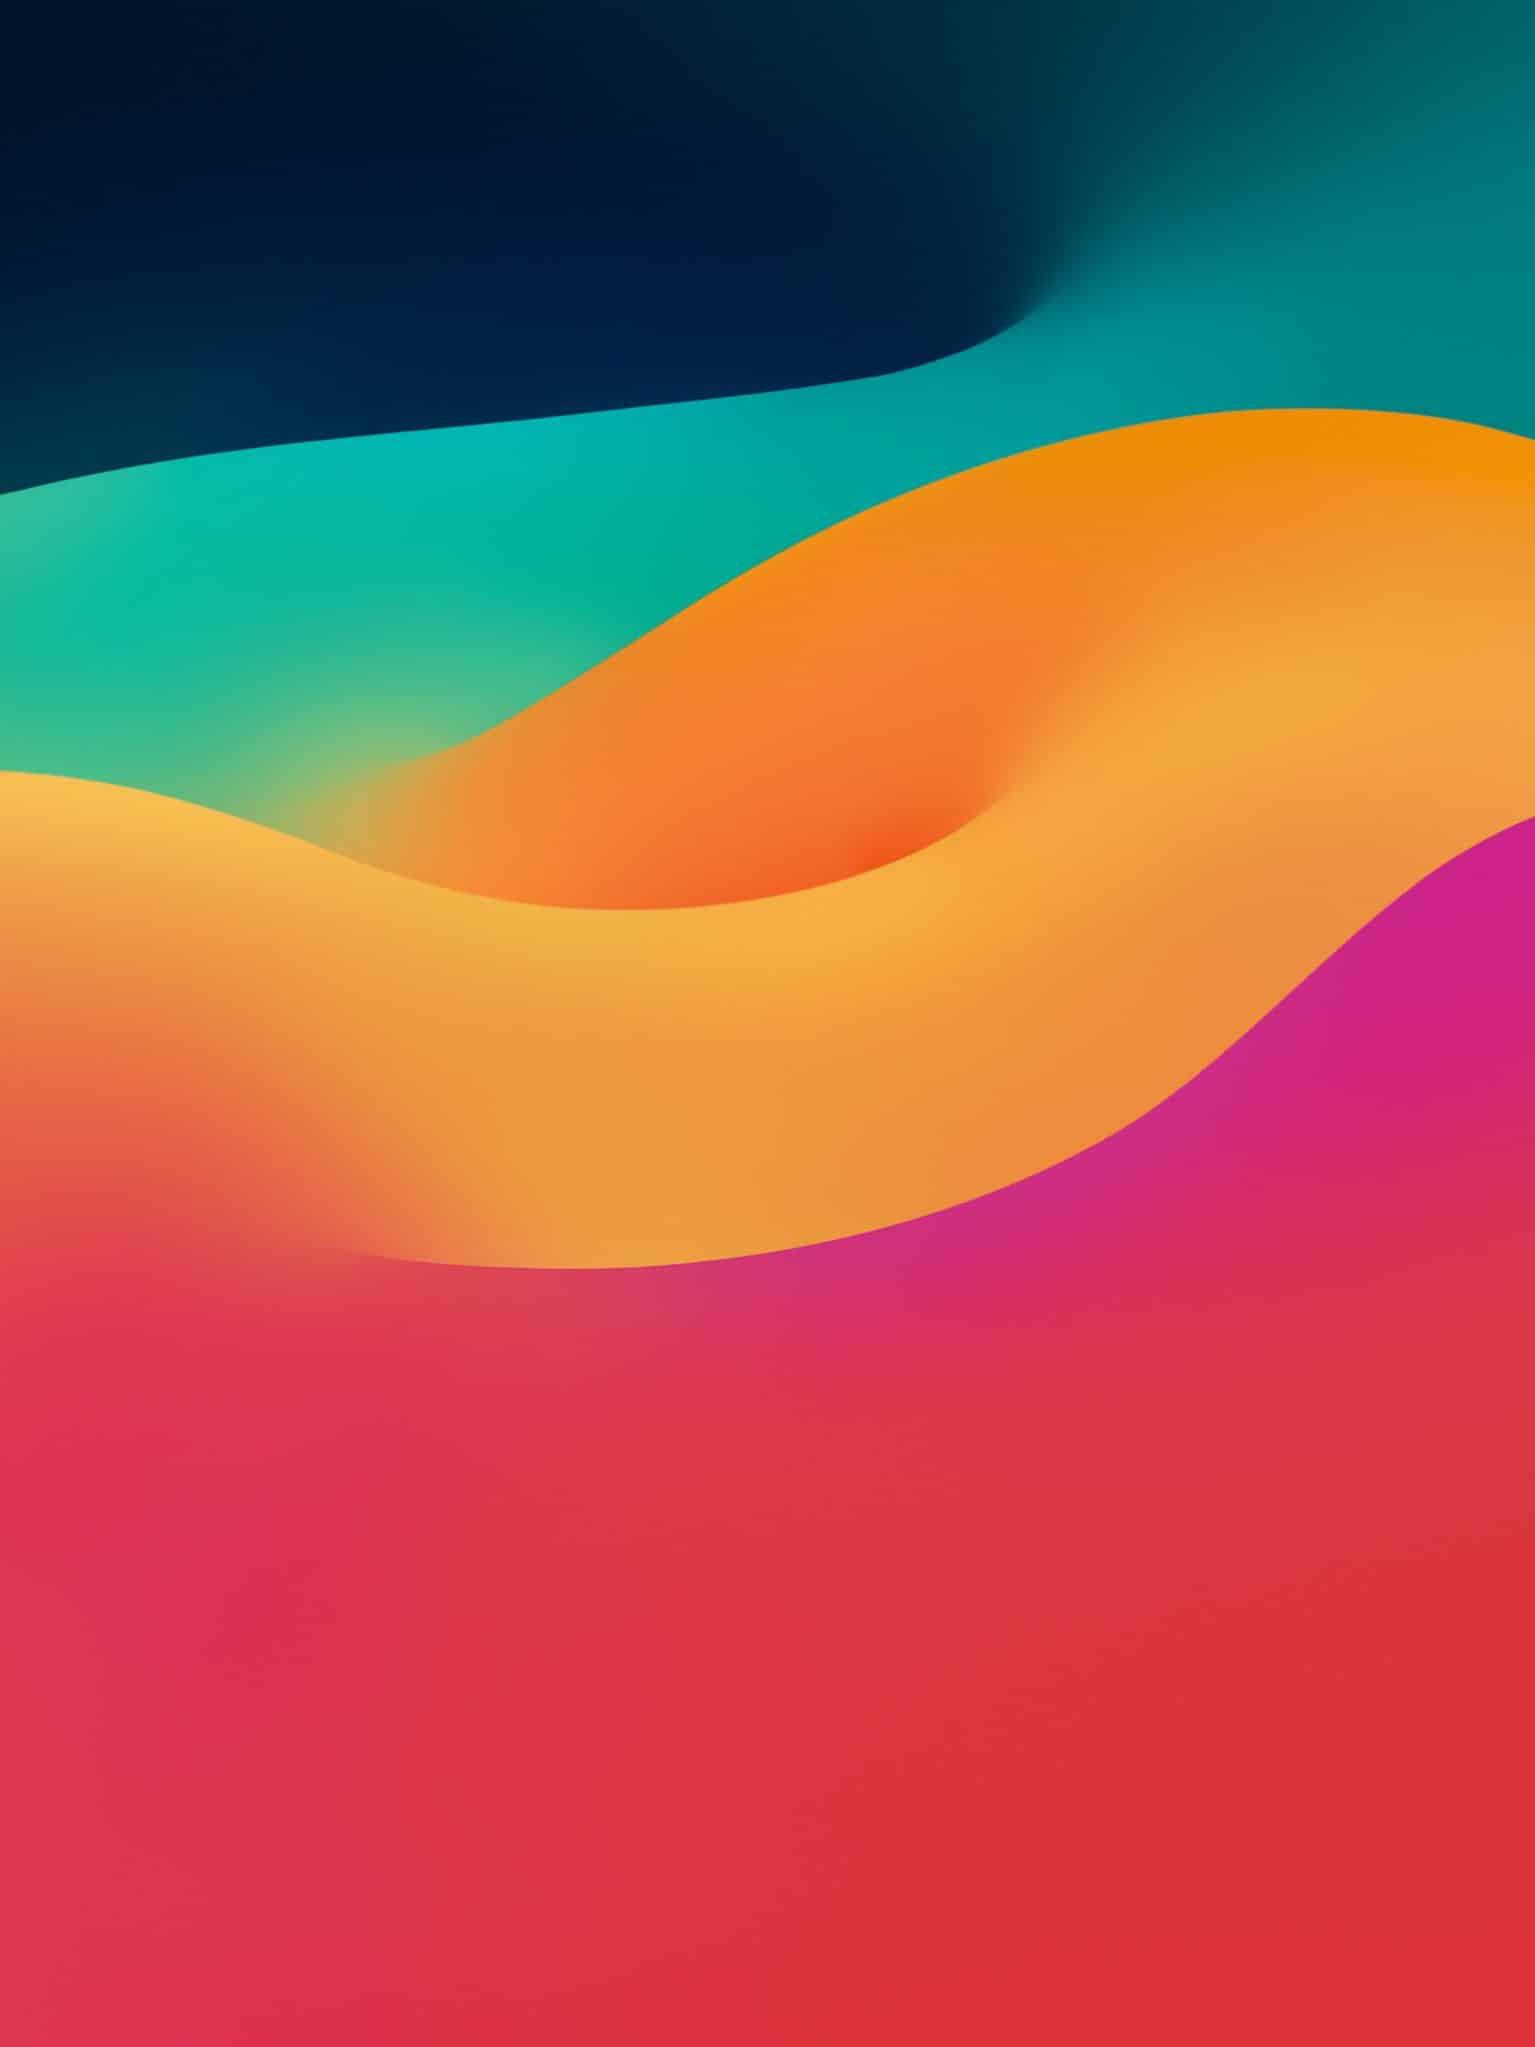 Free download Download iPadOS 17 wallpapers for your iPad in 4K ...